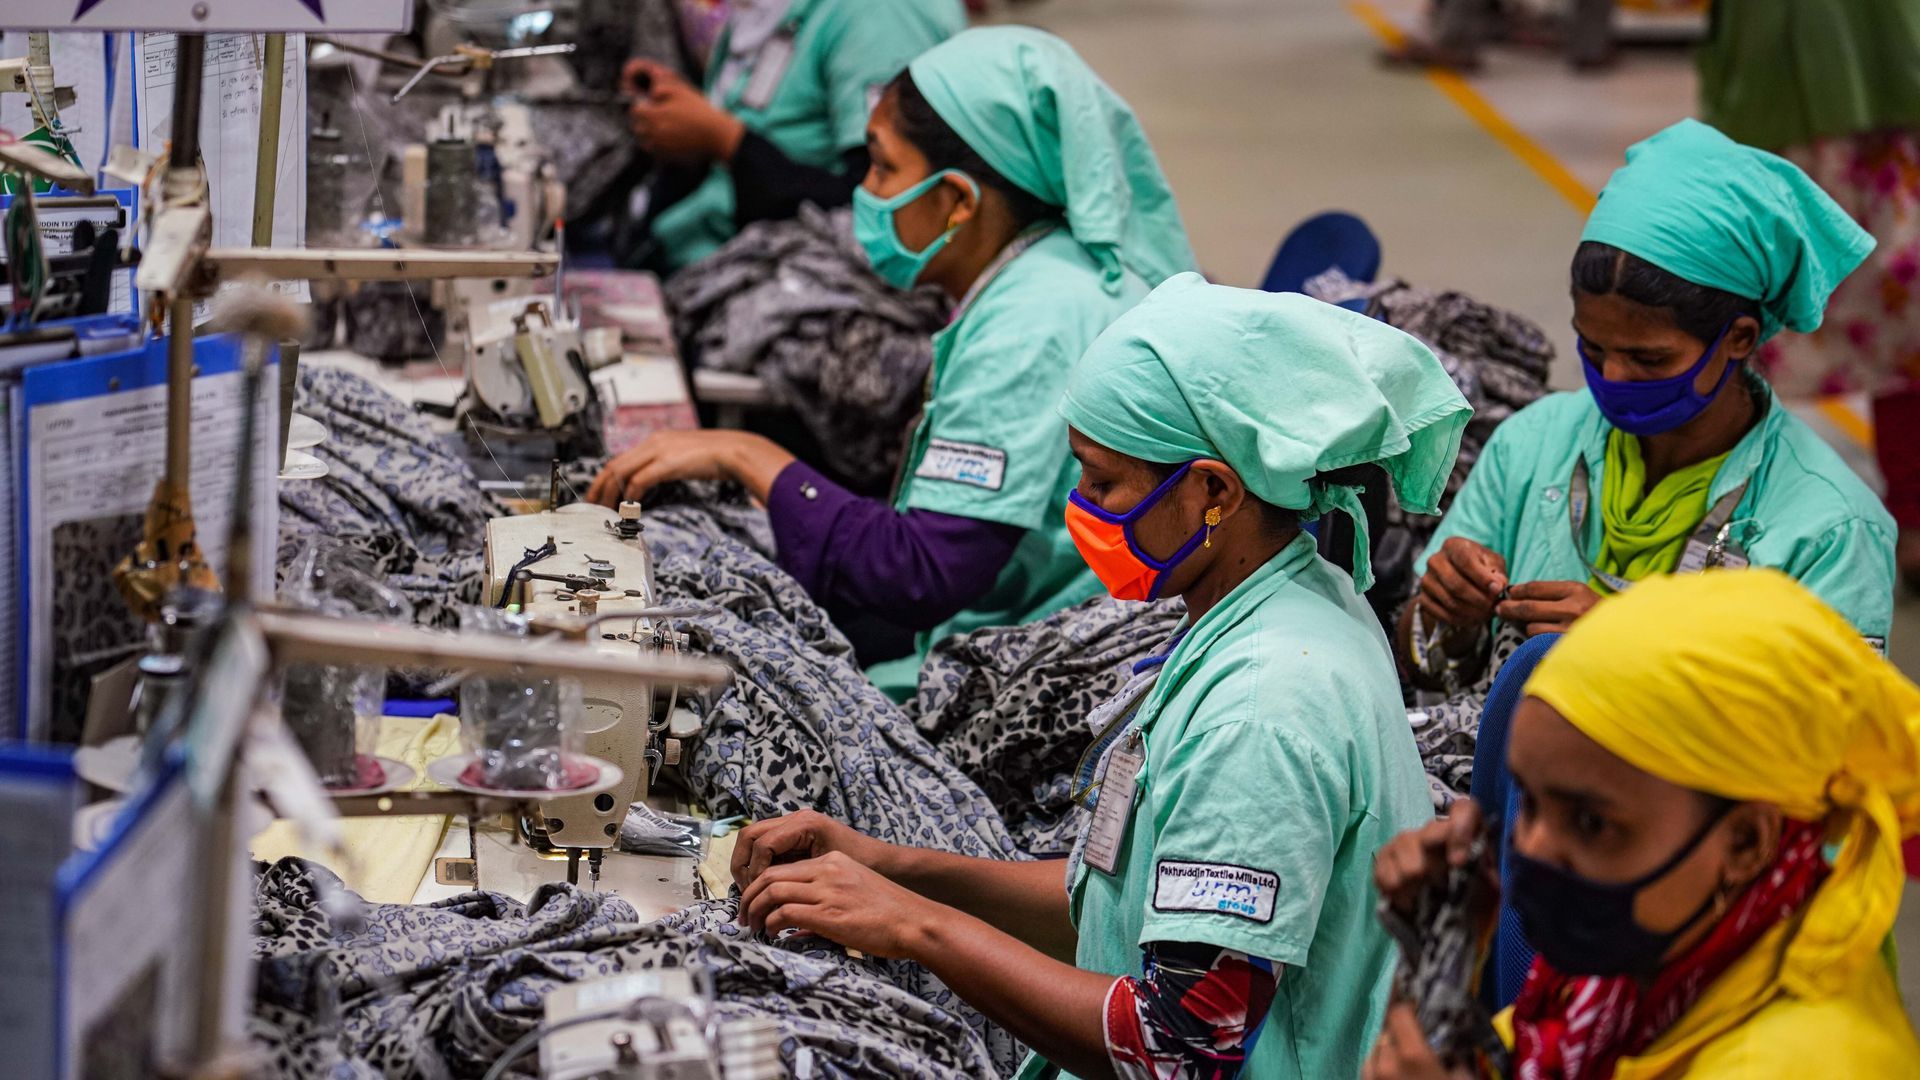 Photo of workers wearing light aqua outfits and masks sewing clothing together in a factory